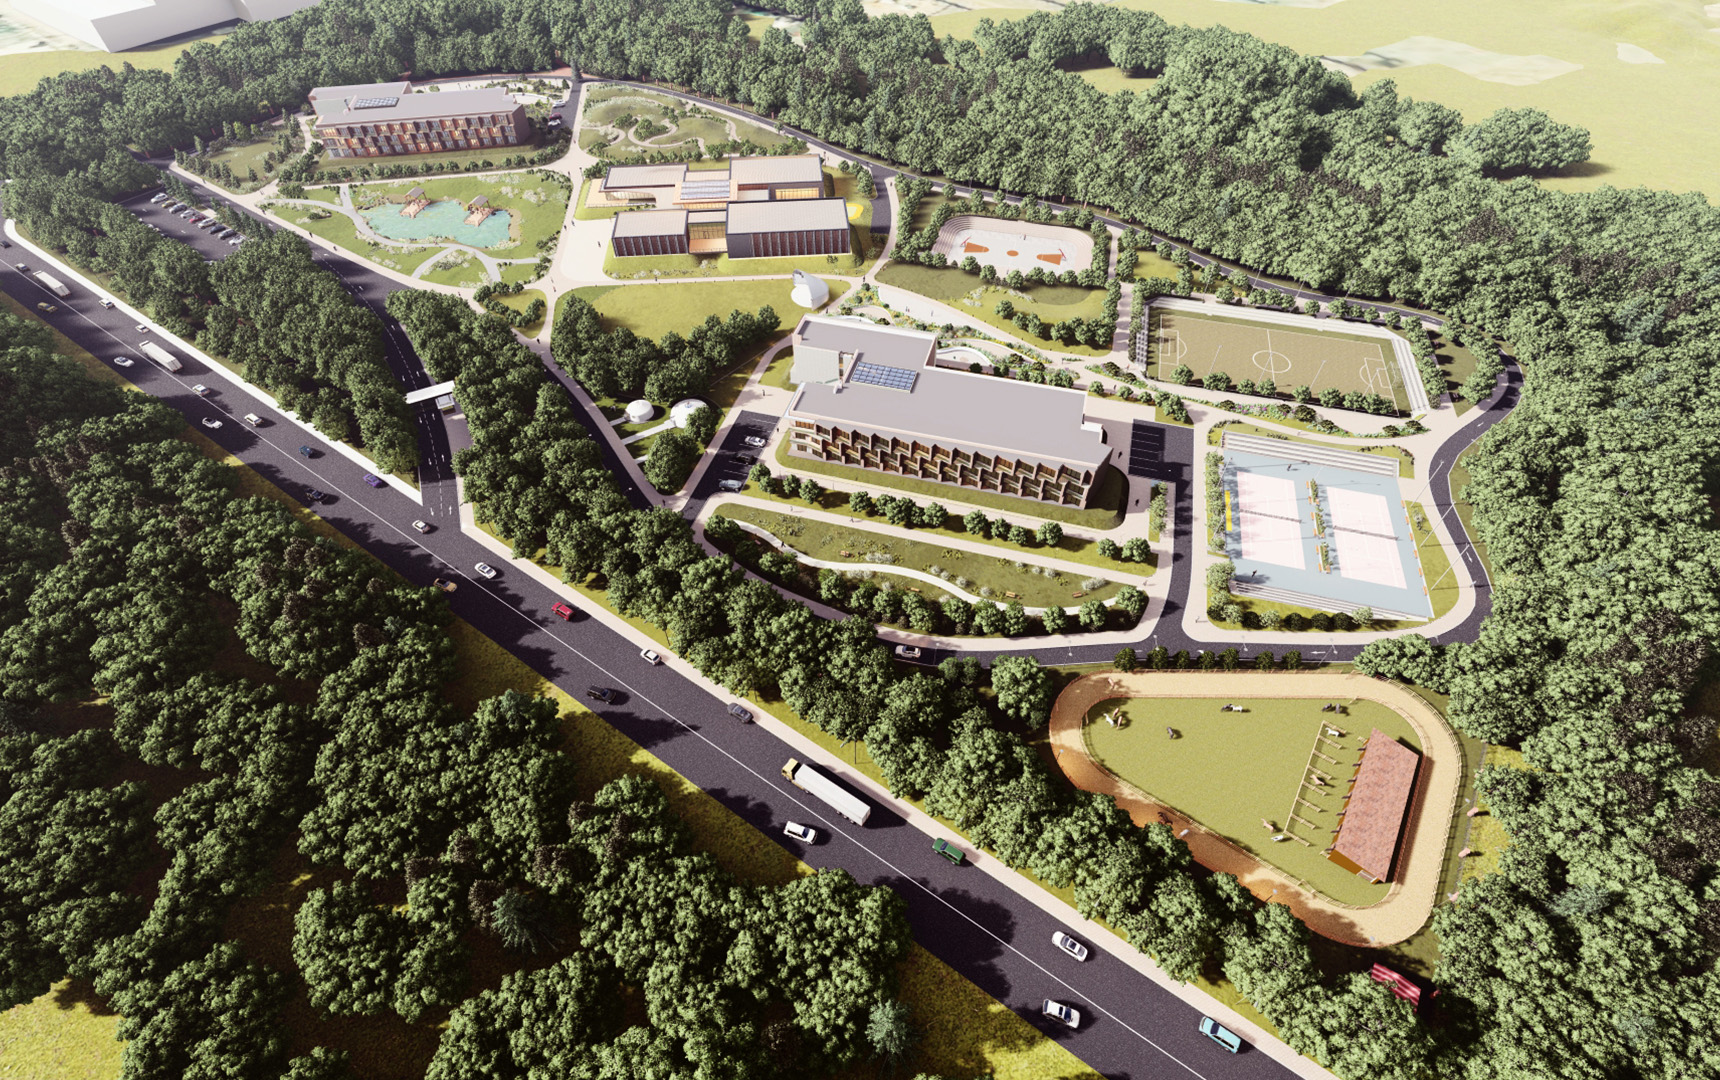 Campus Master Plan and Concept